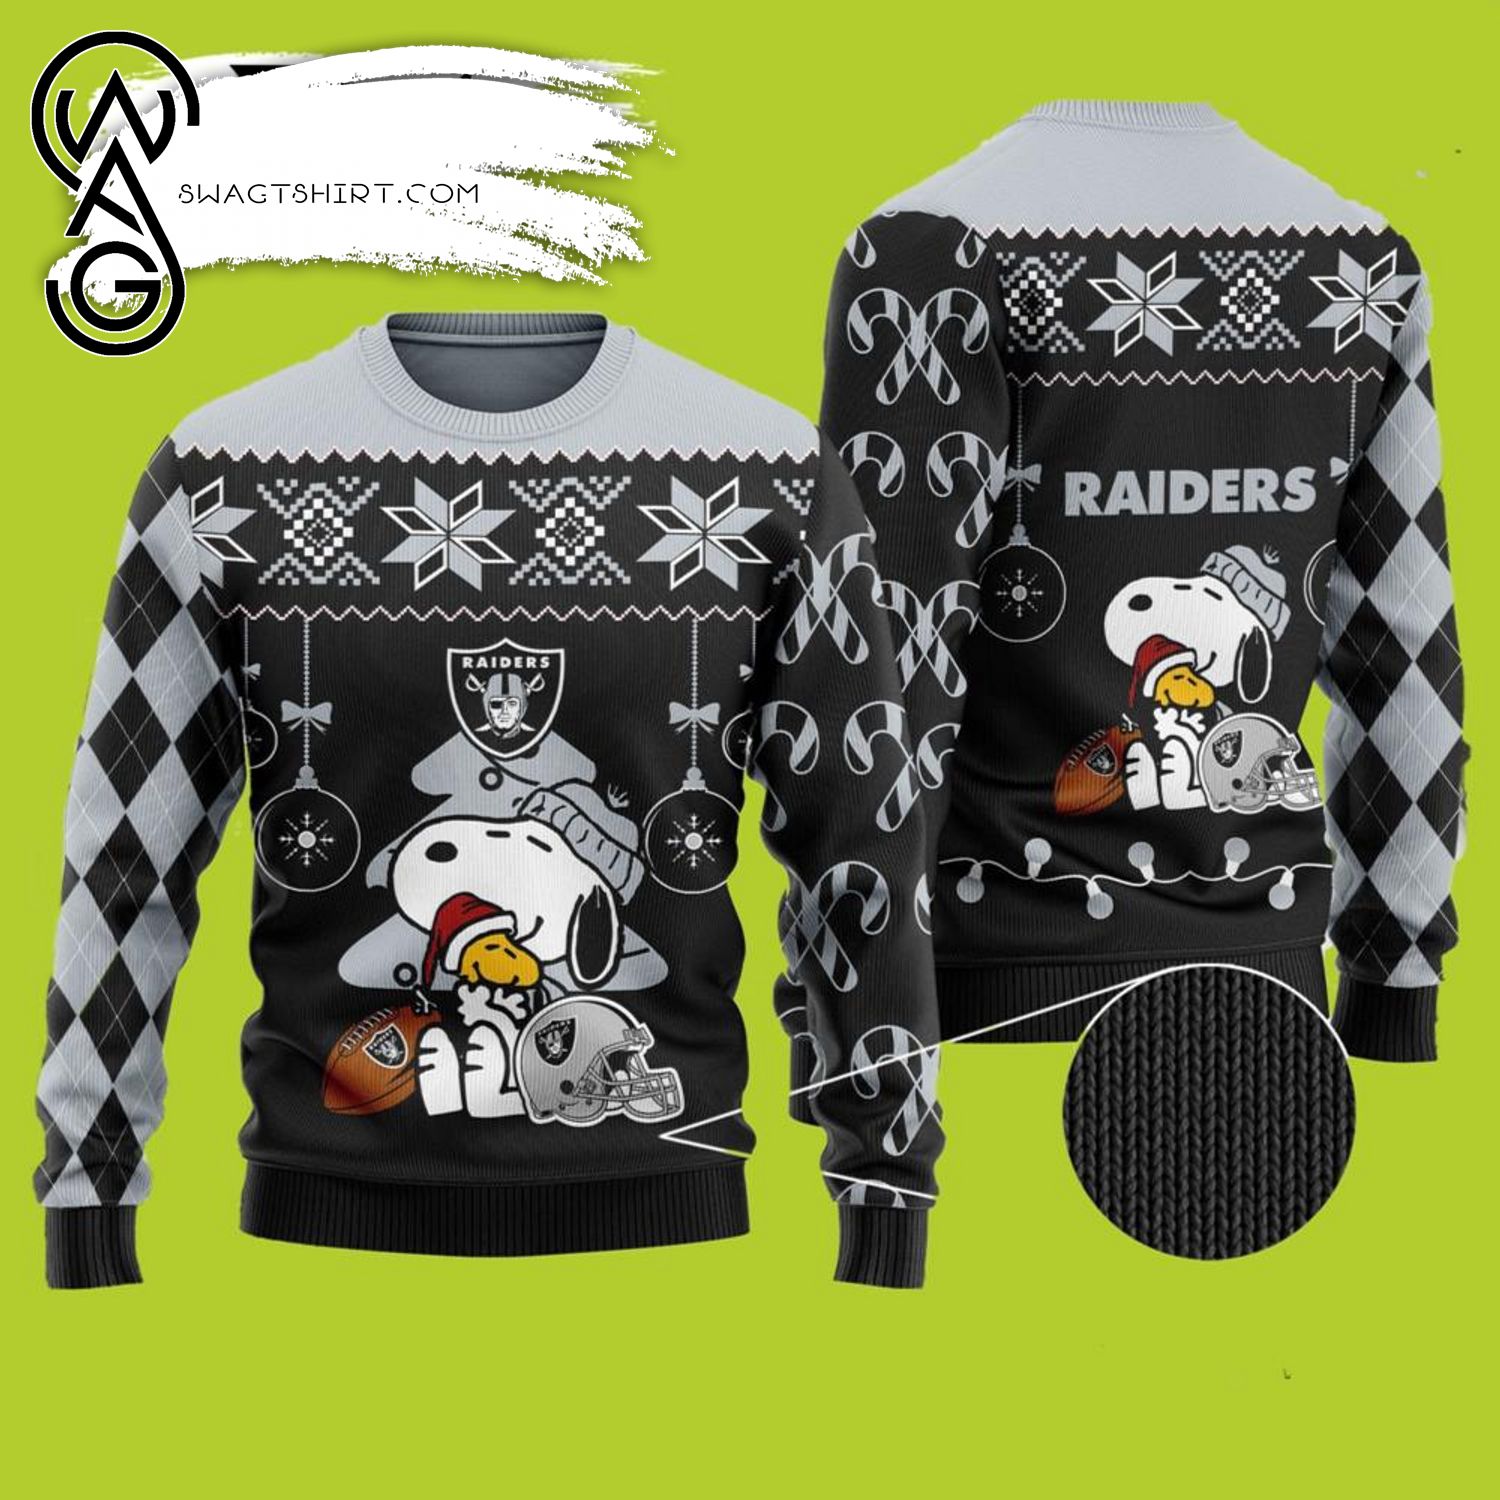 Best Selling Product] Funny Charlie Brown Peanuts Snoopy Raiders Ugly  Christmas Sweater